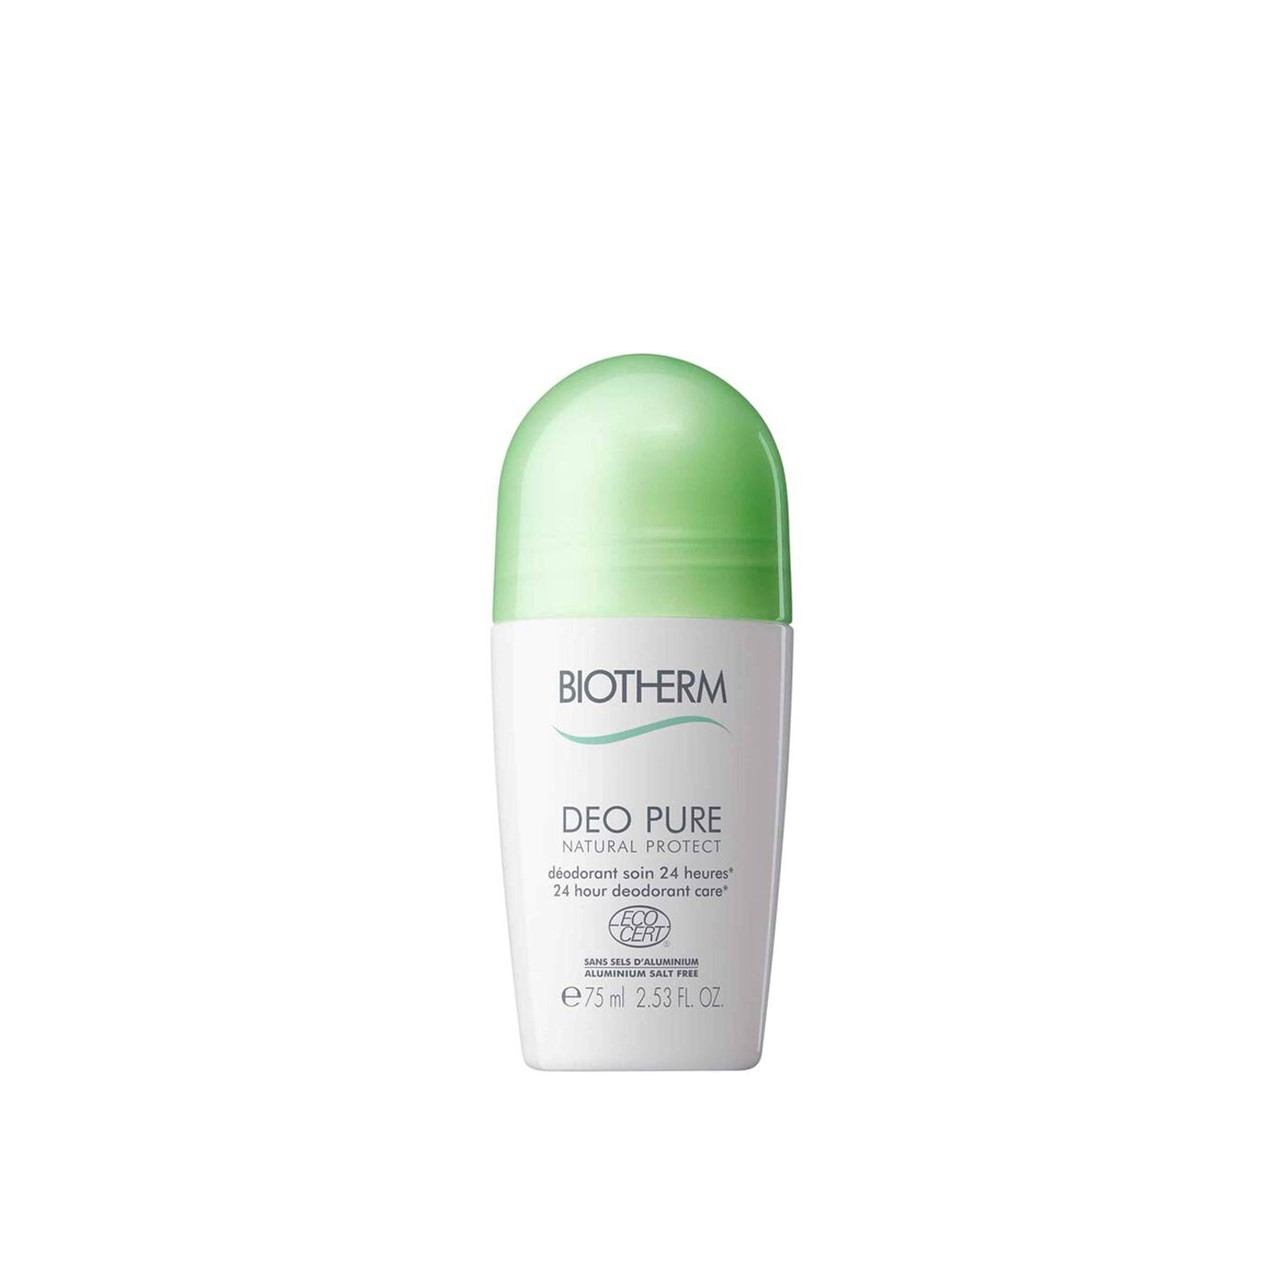 Biotherm Deo Pure Natural Protect 24h Deodorant Care Roll-On 75ml (2.54fl oz)